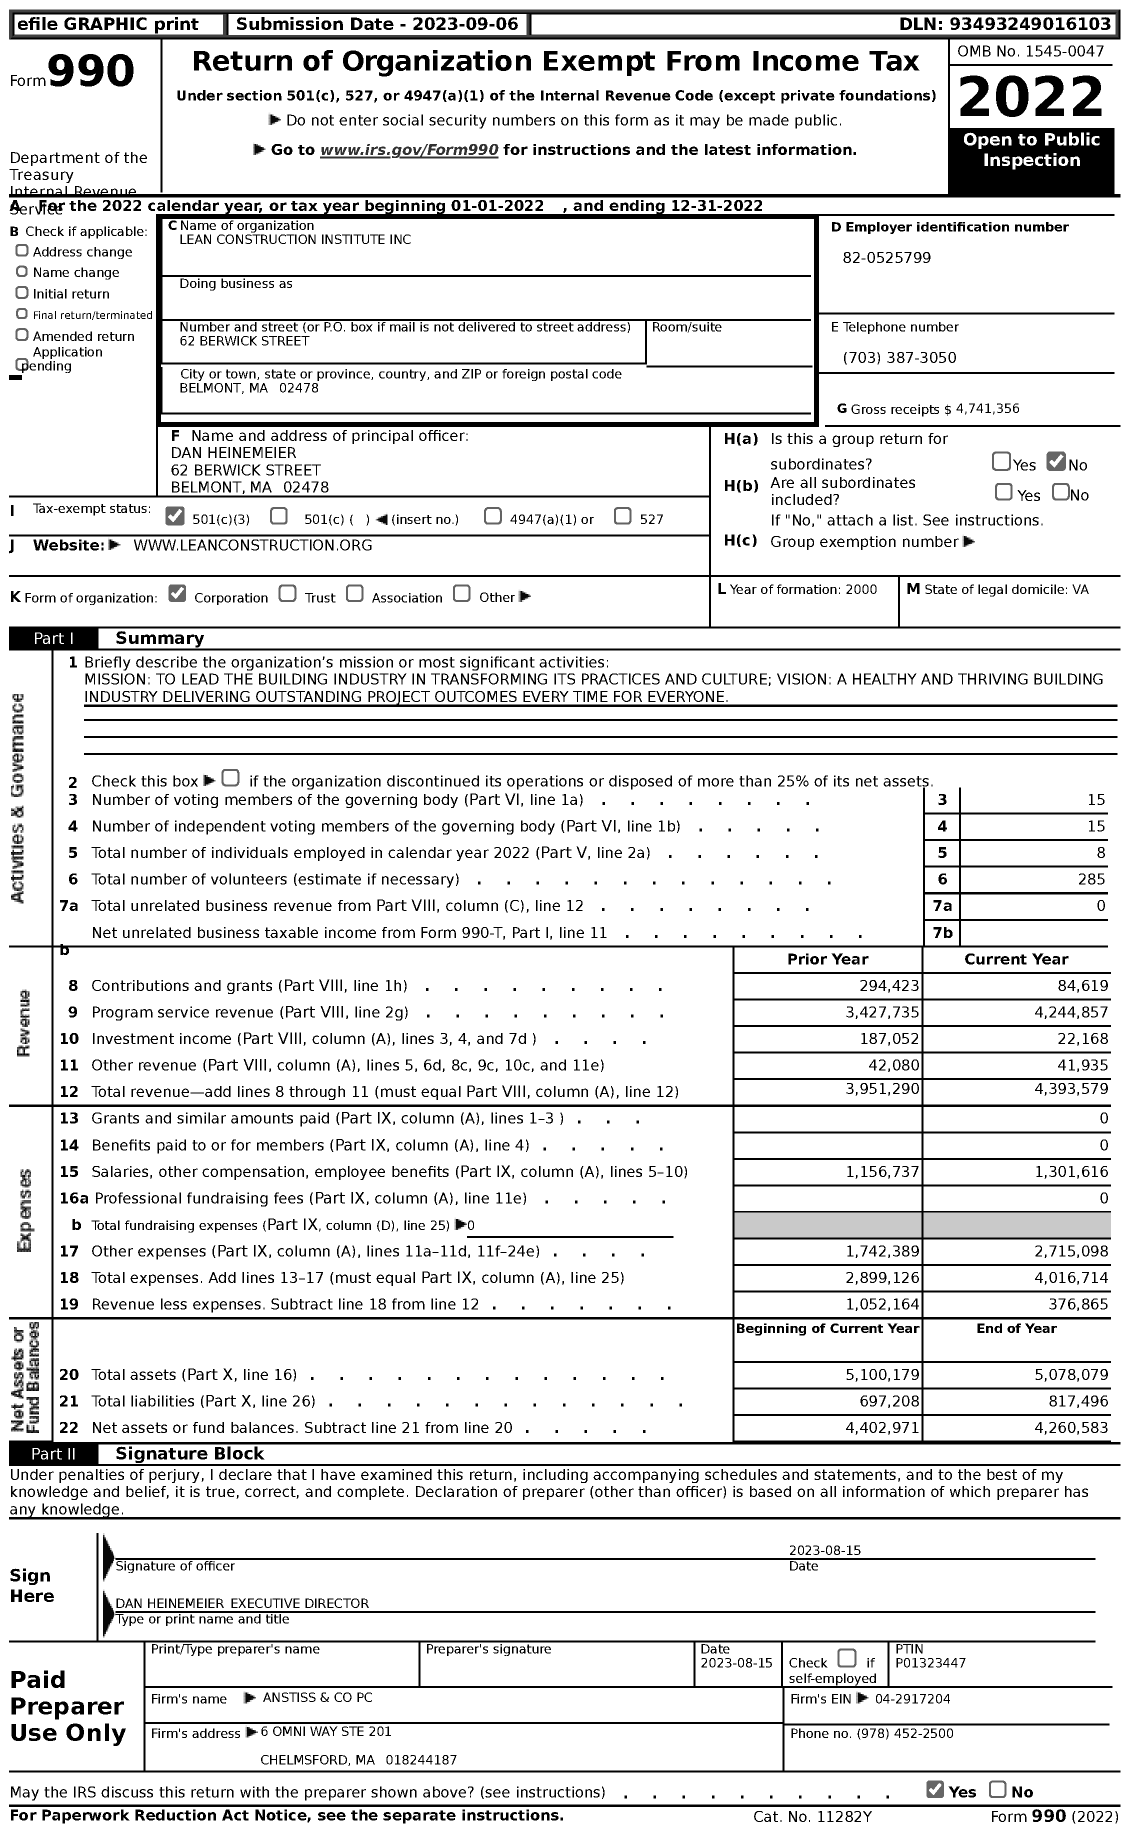 Image of first page of 2022 Form 990 for Lean Construction Institute